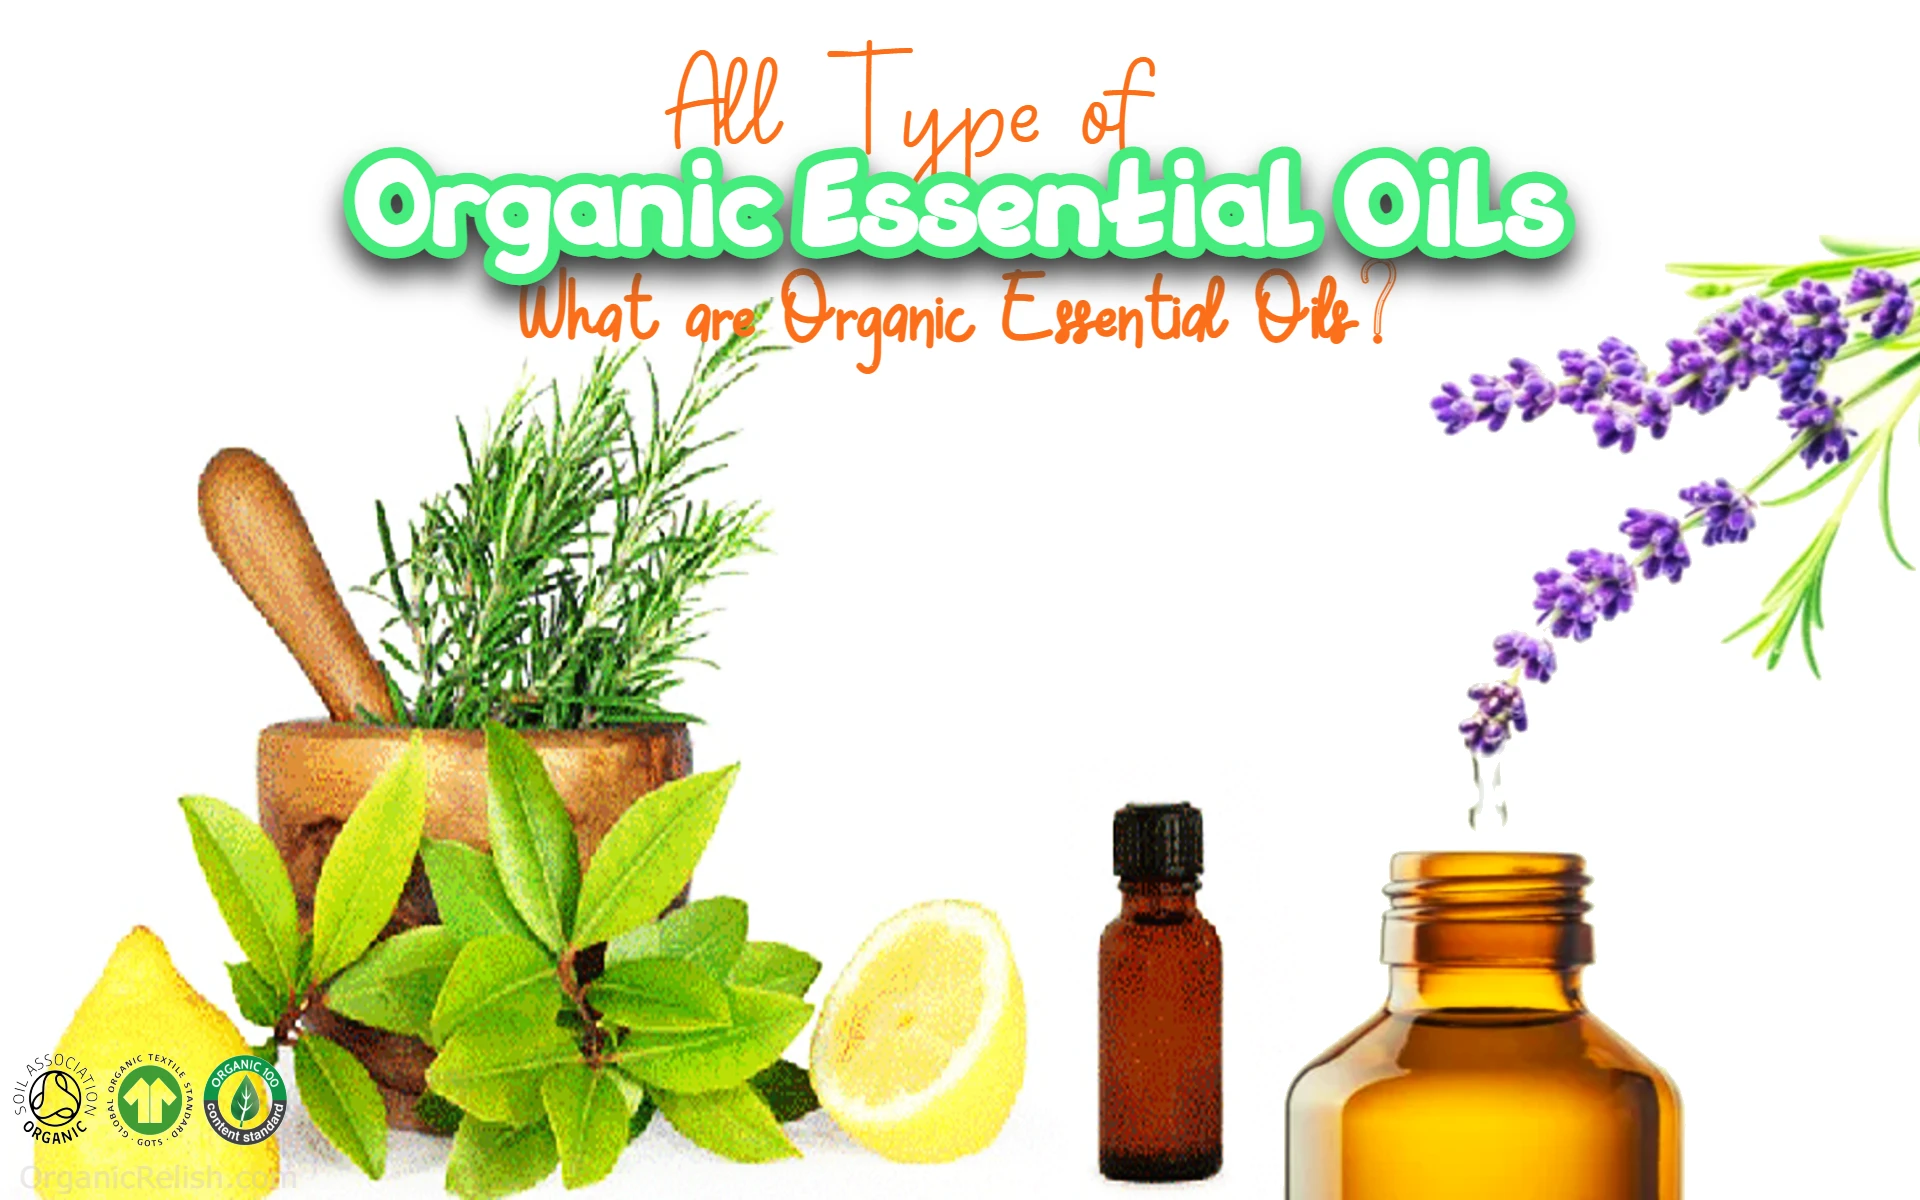 What are Organic Essential Oils